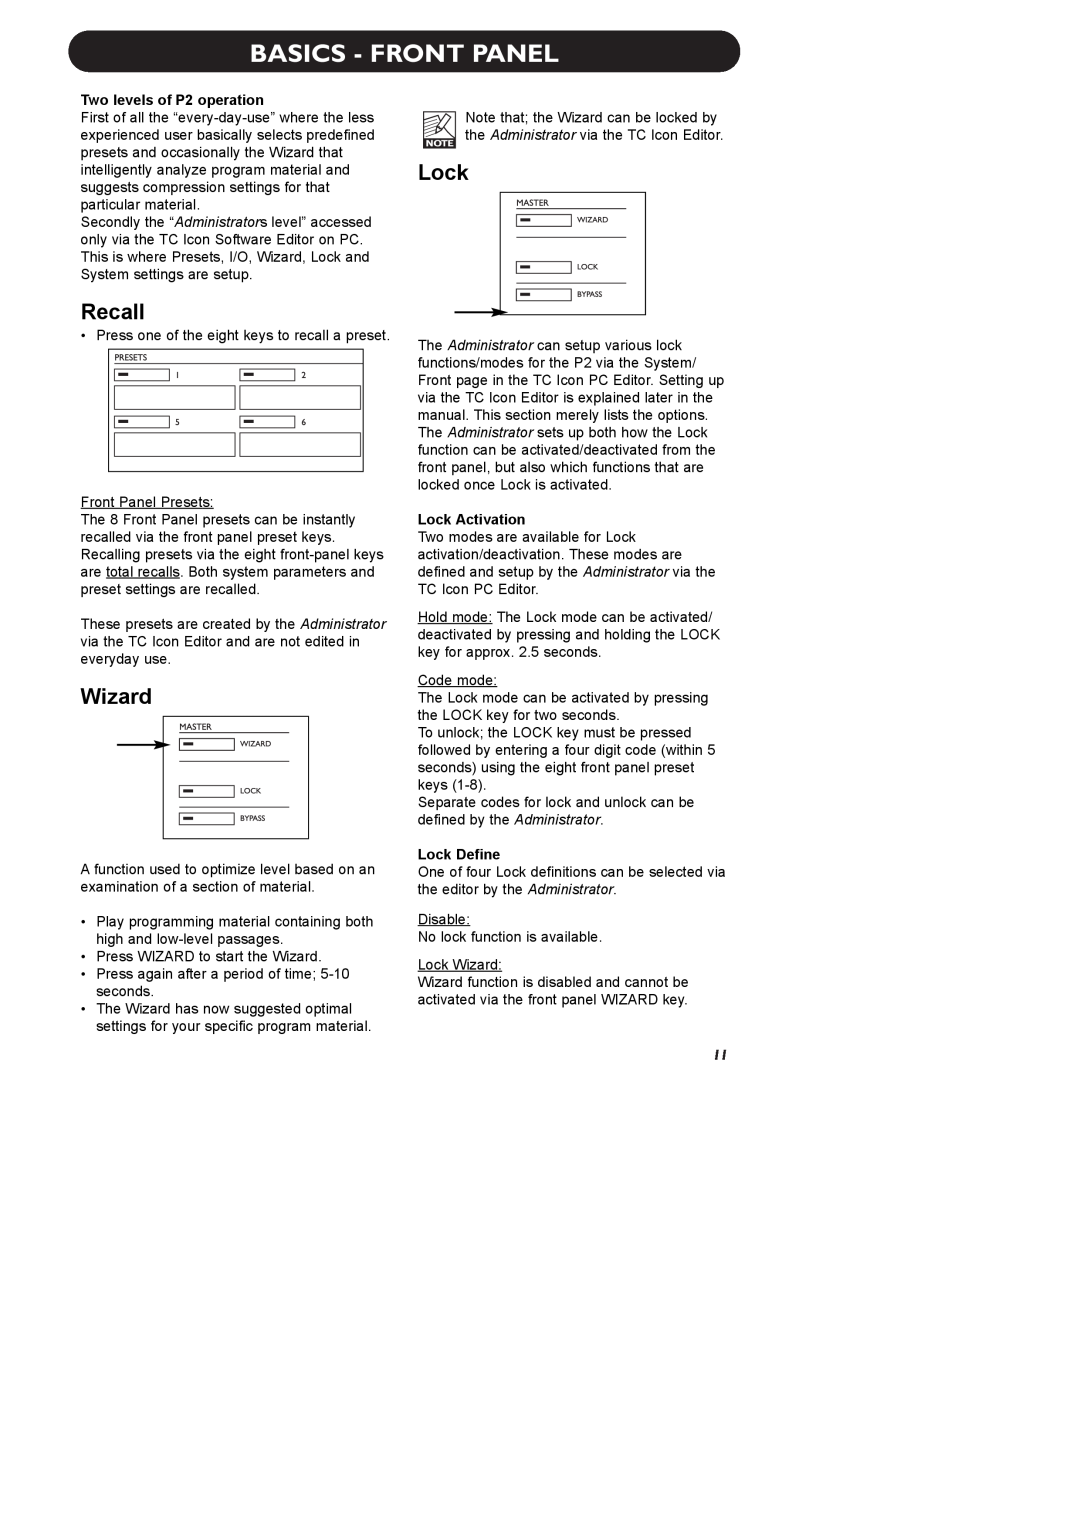 TC electronic SDN BHD manual Basics - Front Panel, Recall, Wizard, Two levels of P2 operation, Lock Activation 